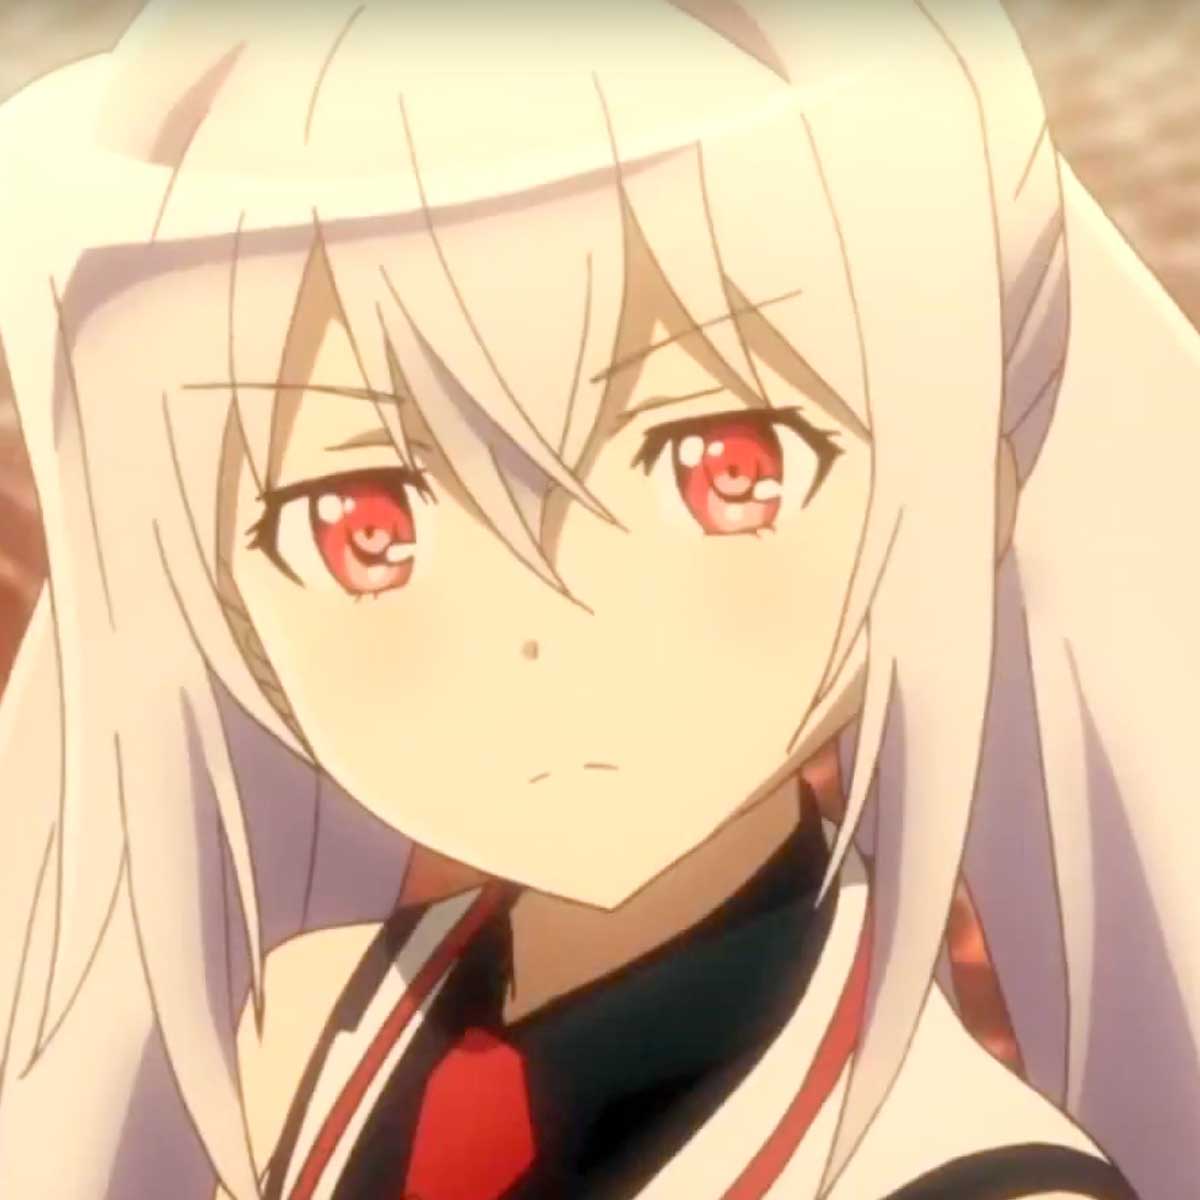 Play What Do You Say (Plastic Memories) | Music Sheet on Virtual Piano